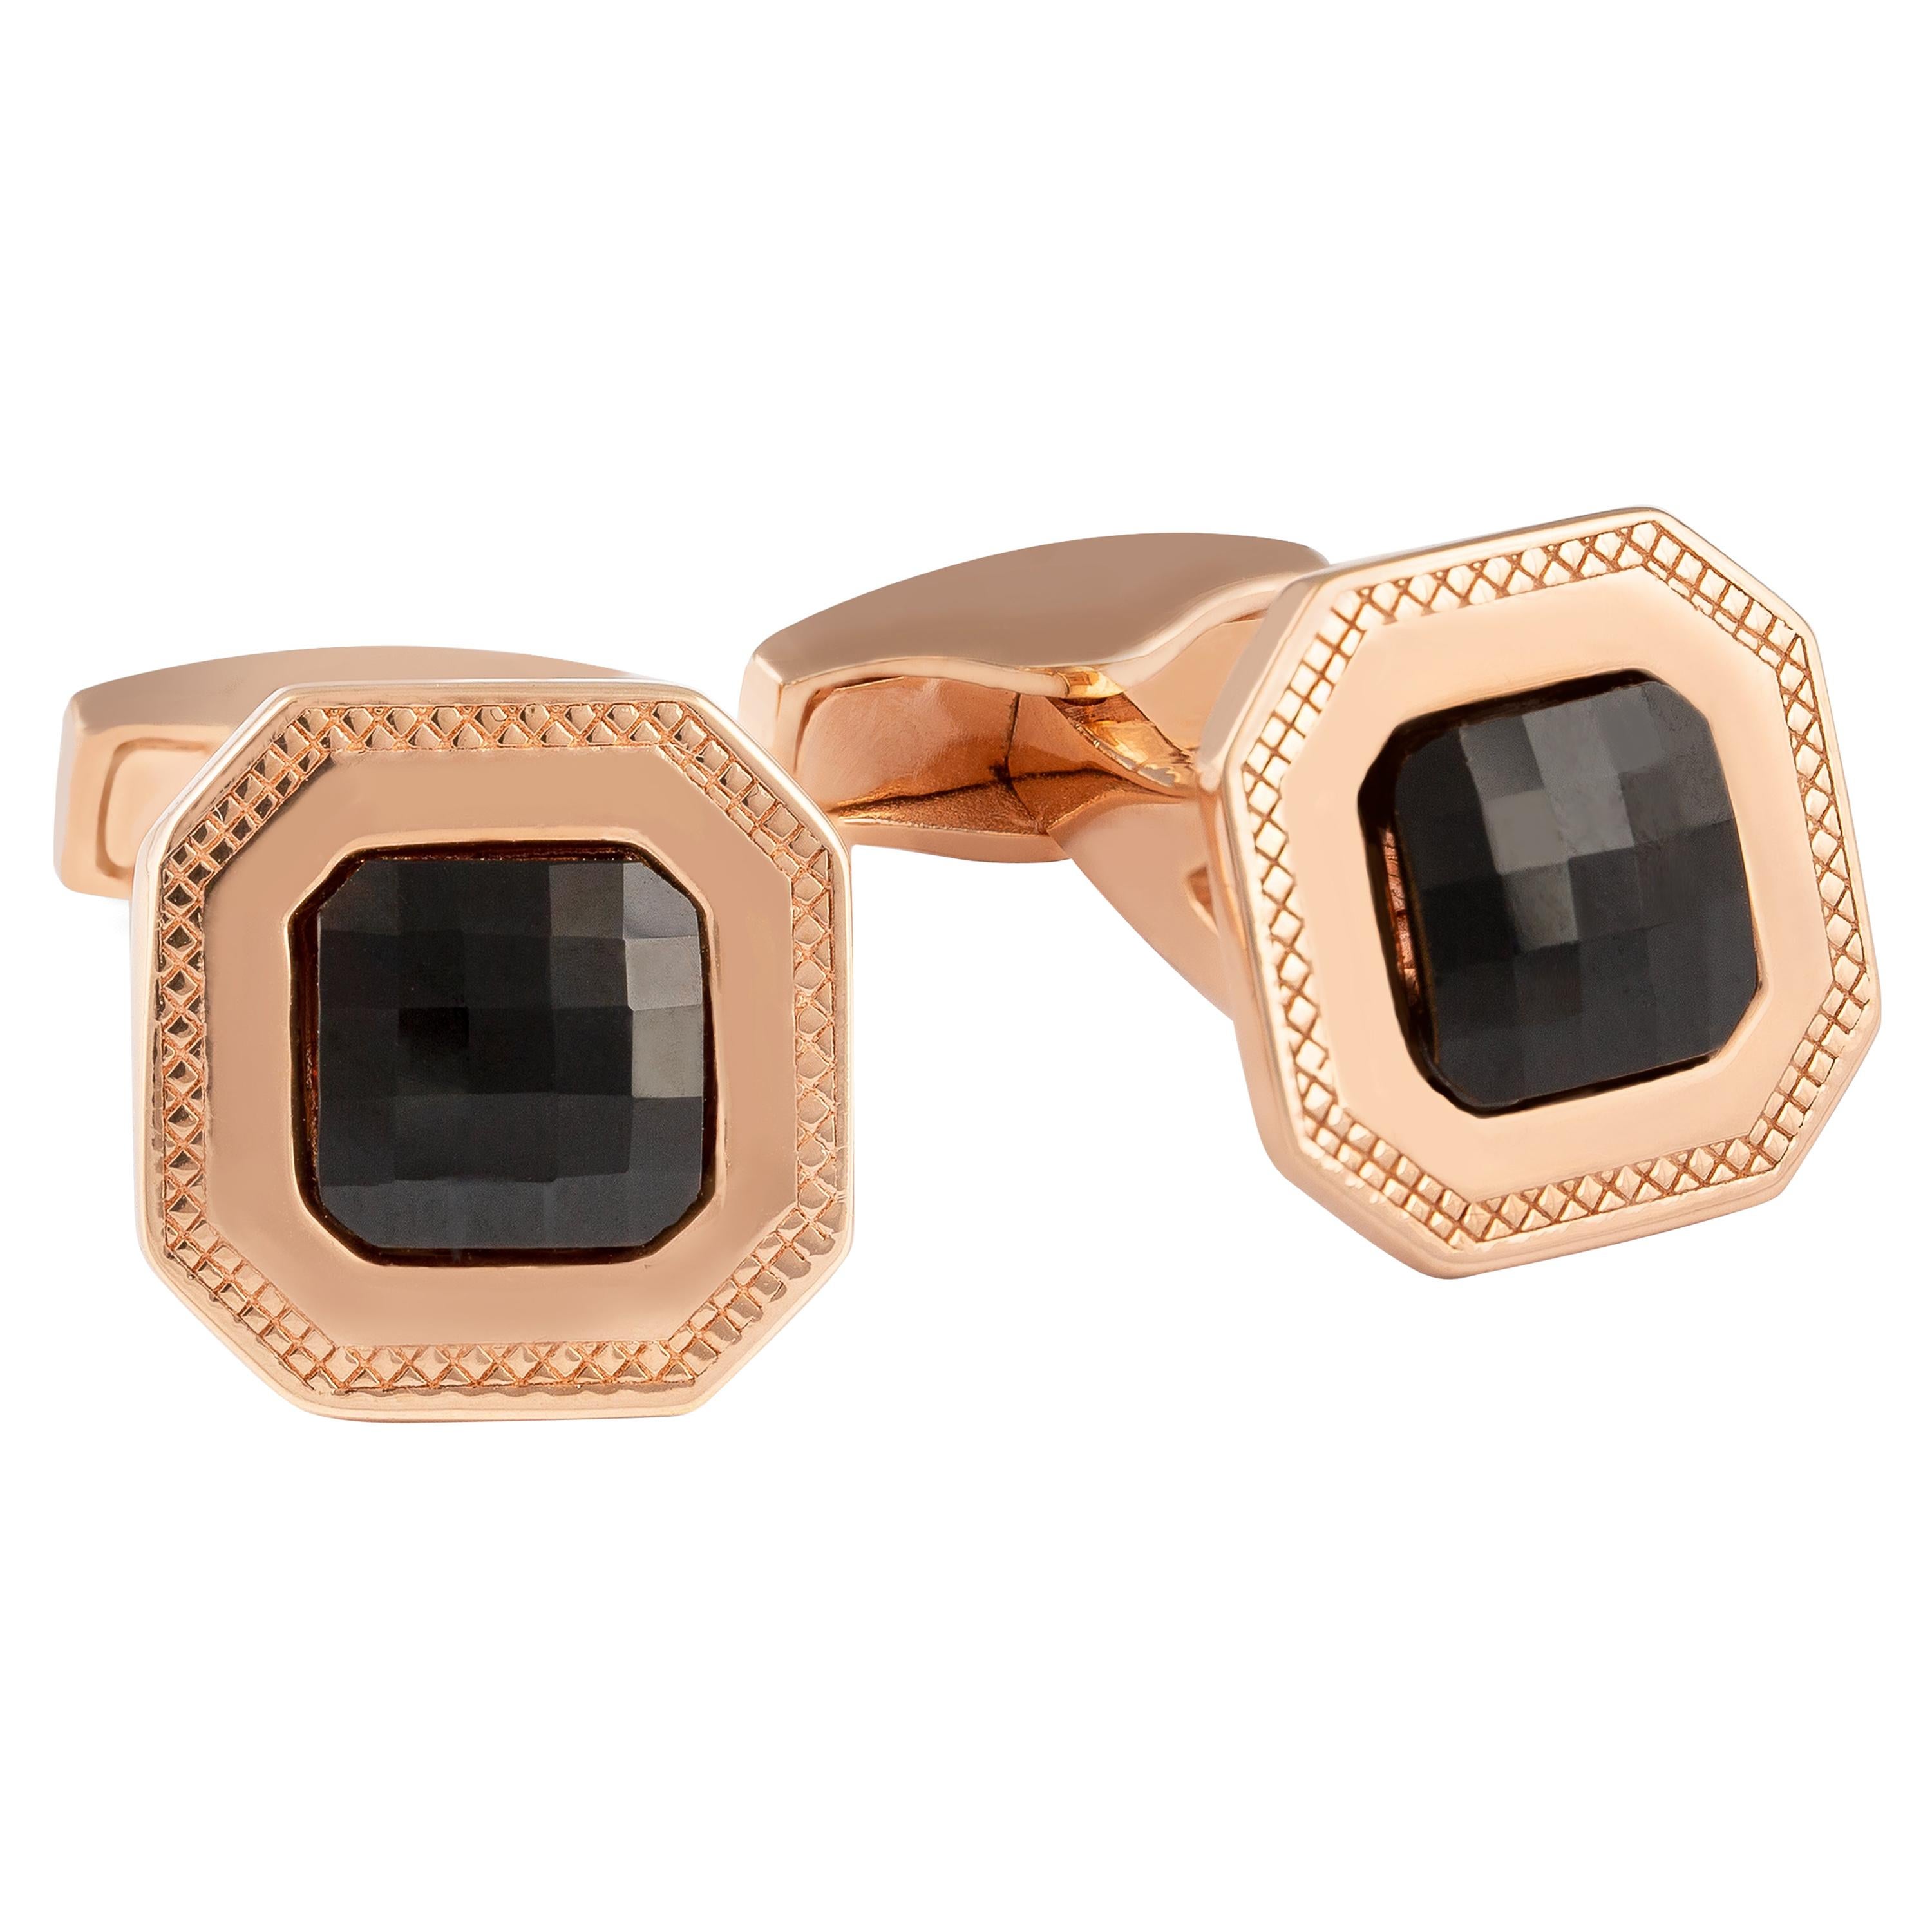 Tateossian Checkboard Cufflinks in Rose Gold 'Limited Edition 30 Pair'